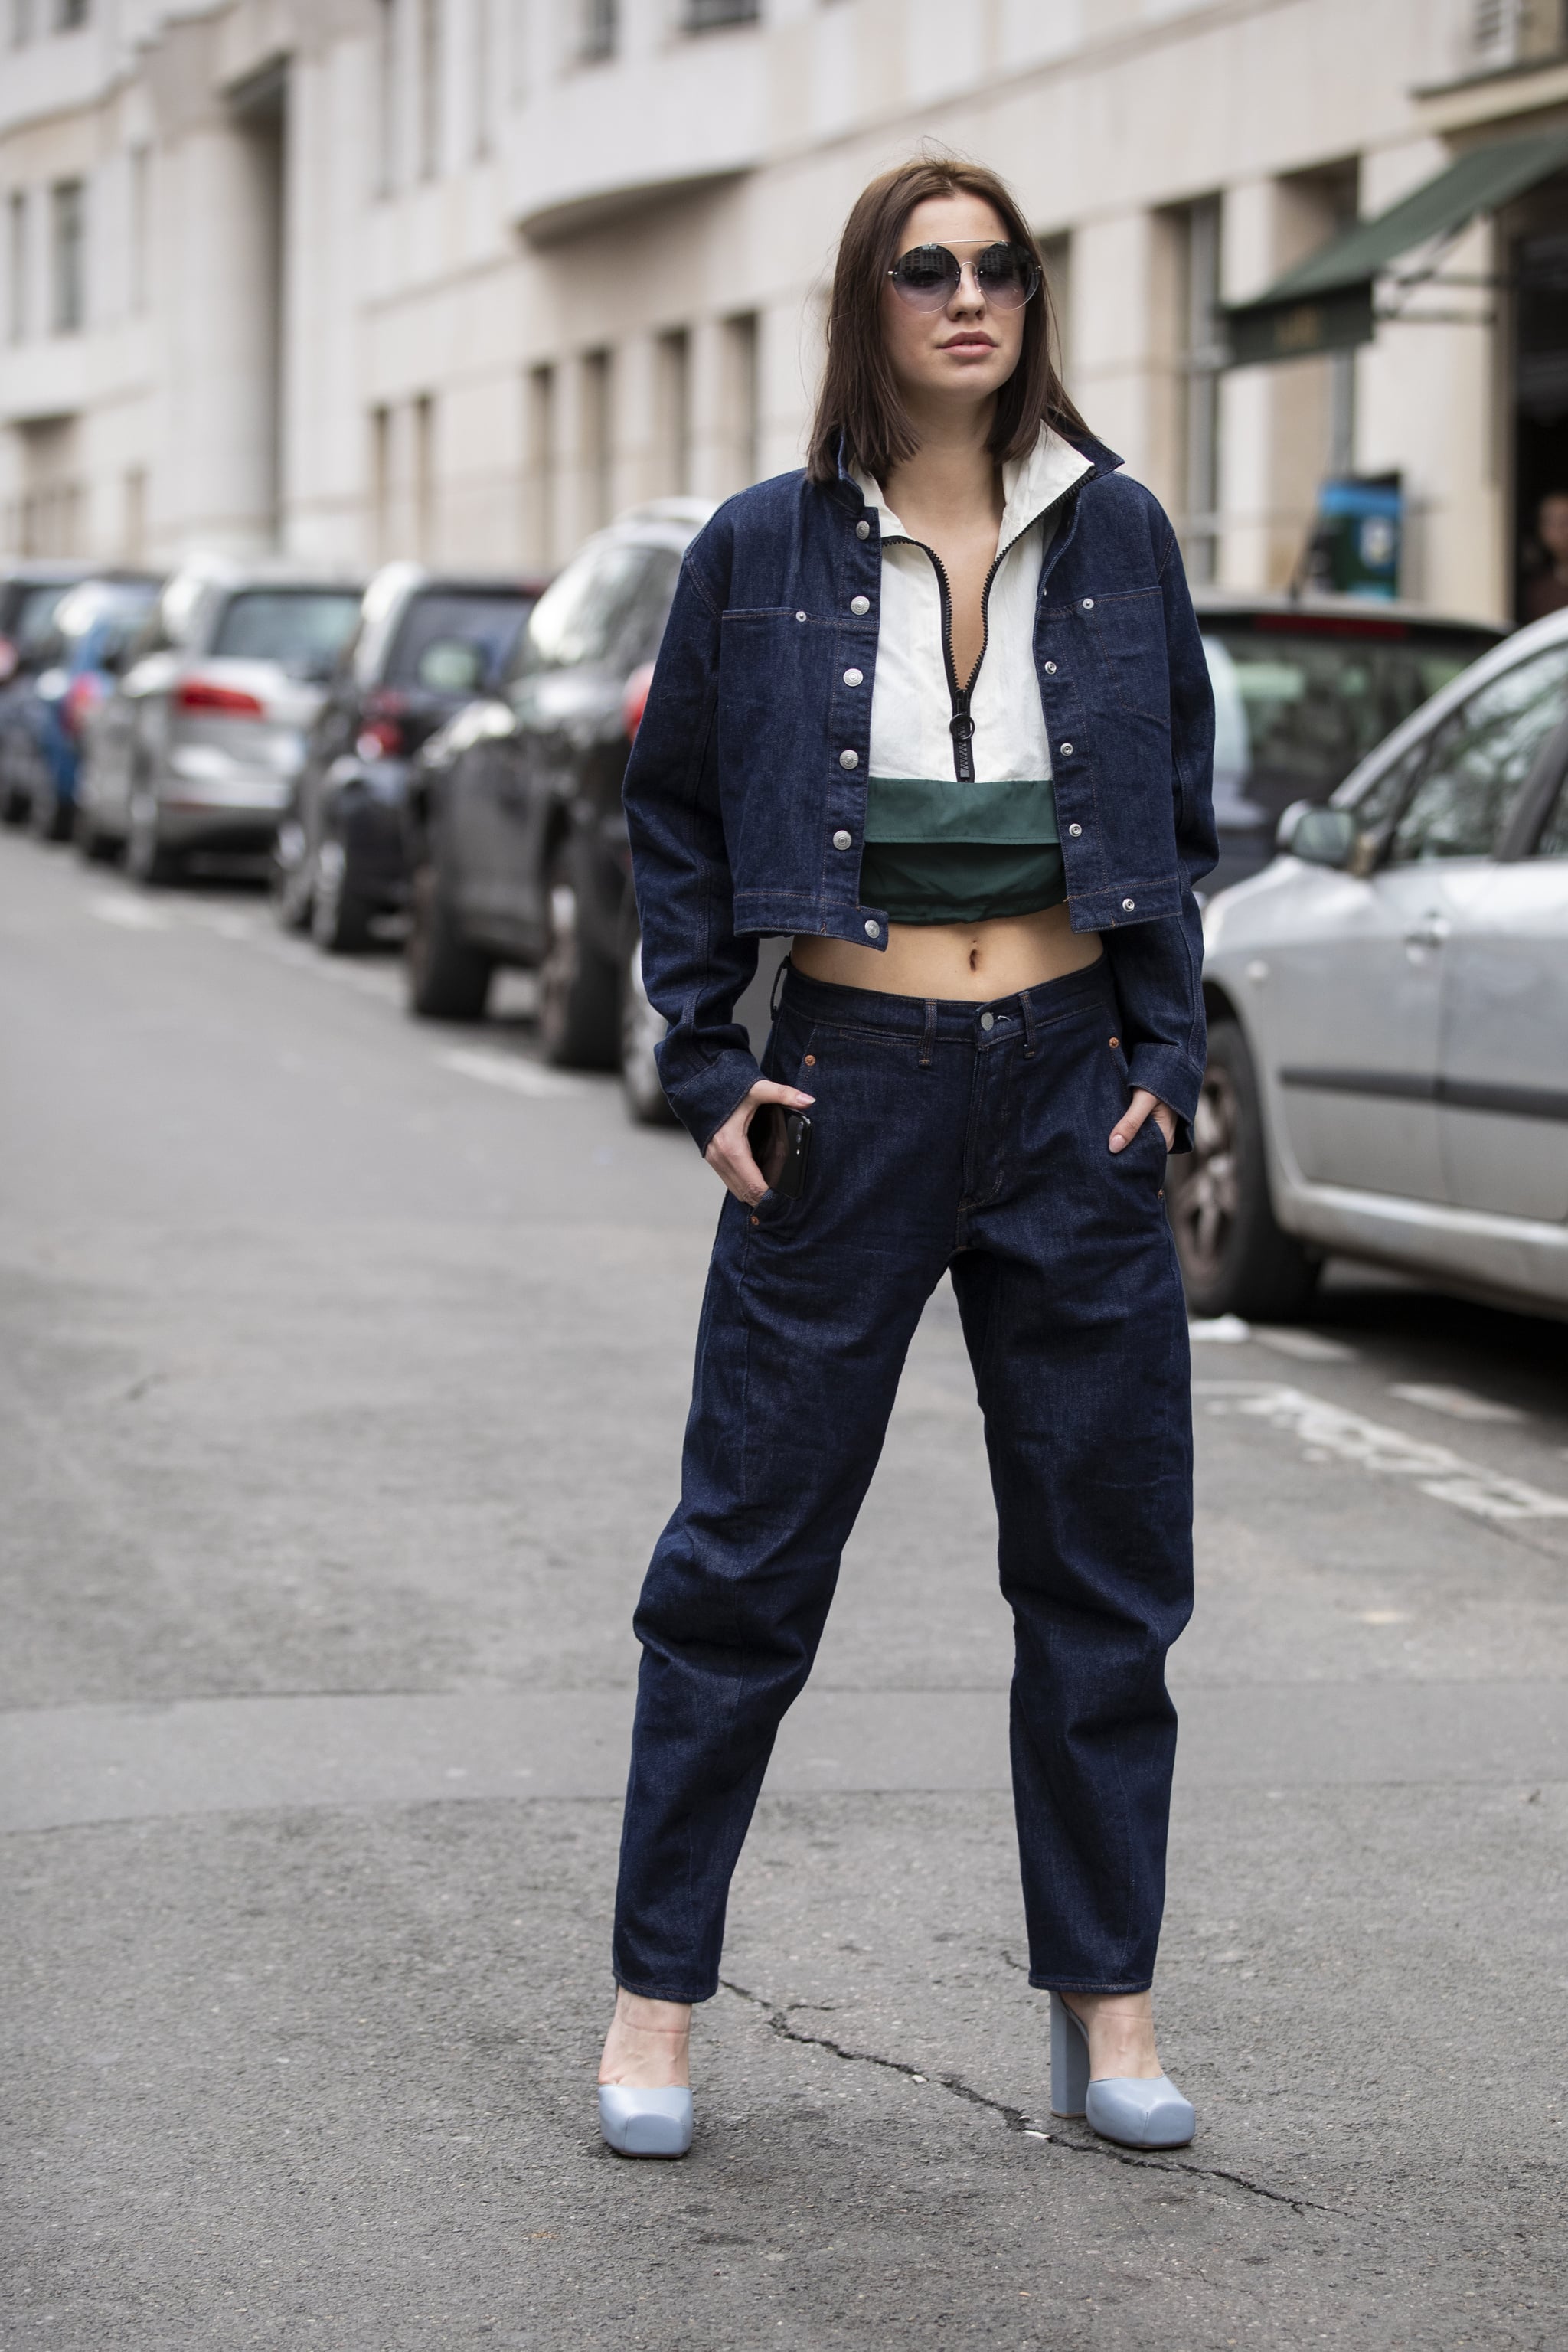 Can you wear a crop top in your 30s?